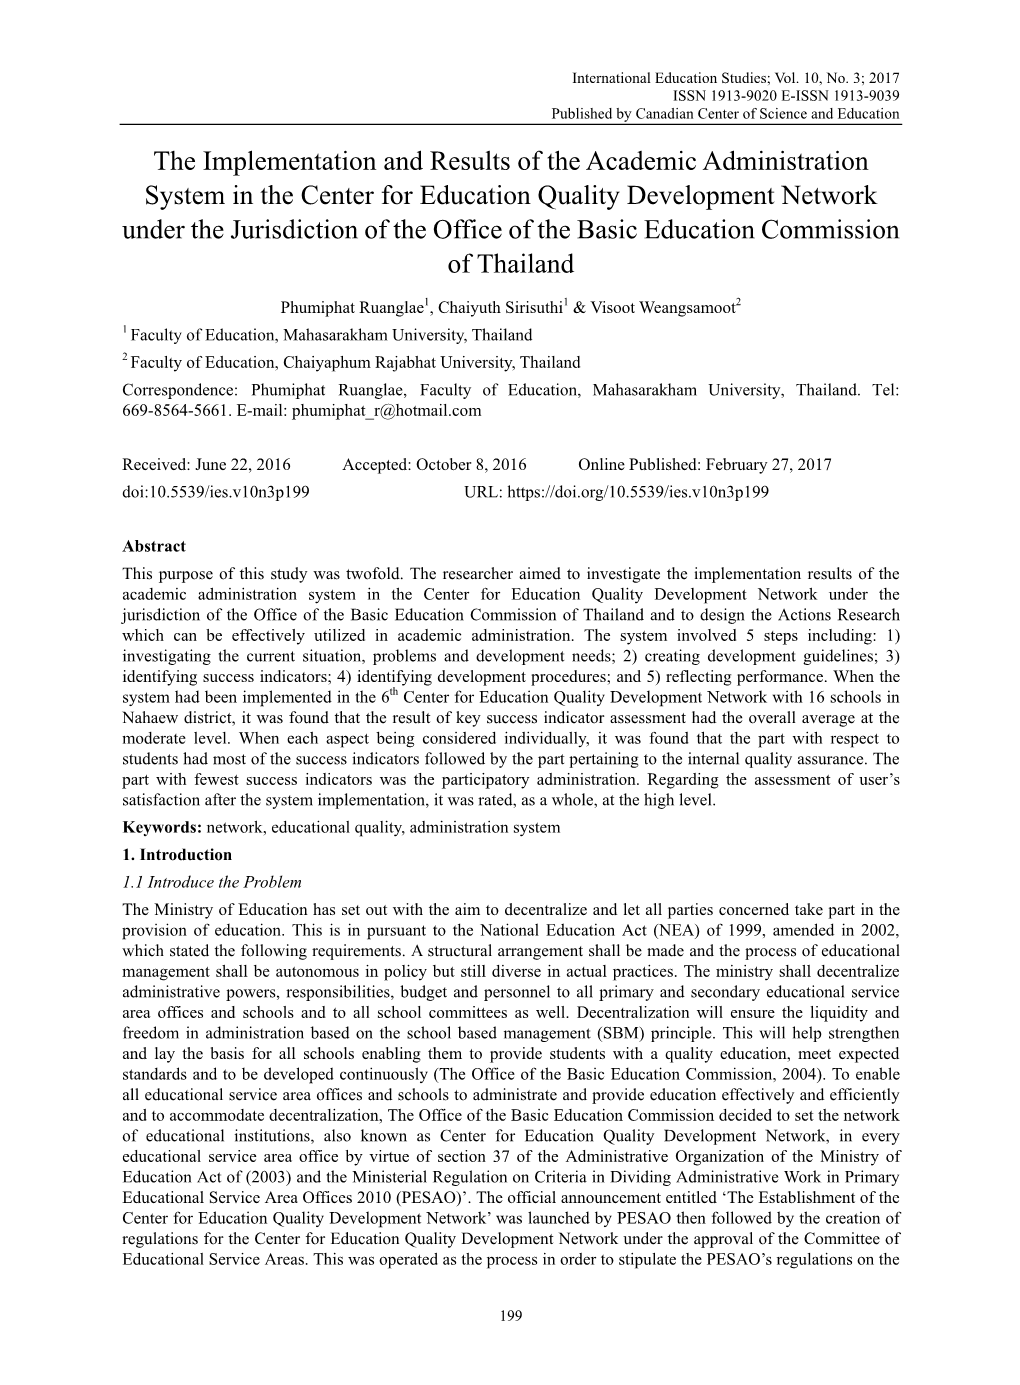 The Implementation and Results of the Academic Administration System in the Center for Education Quality Development Network